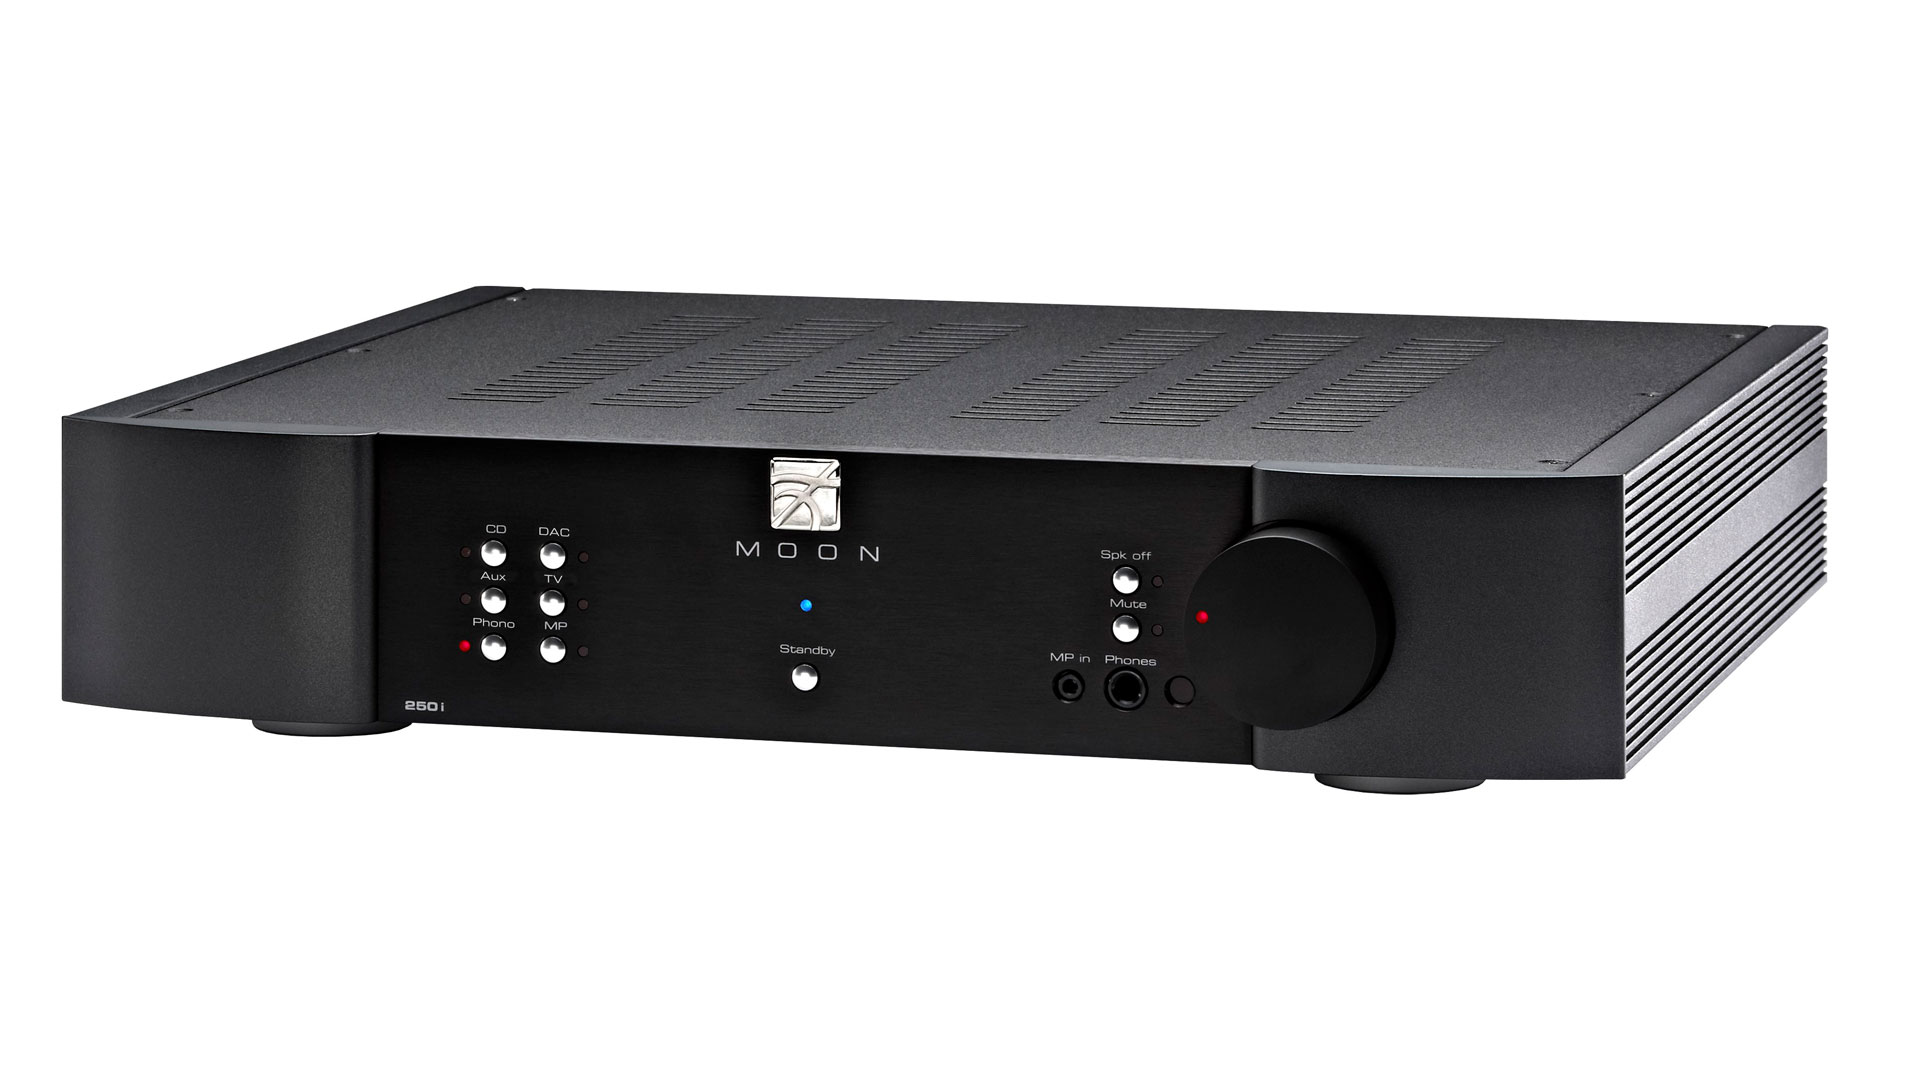 The new integrated amplifier Moon 250i V2 (Image Credit: Moon)